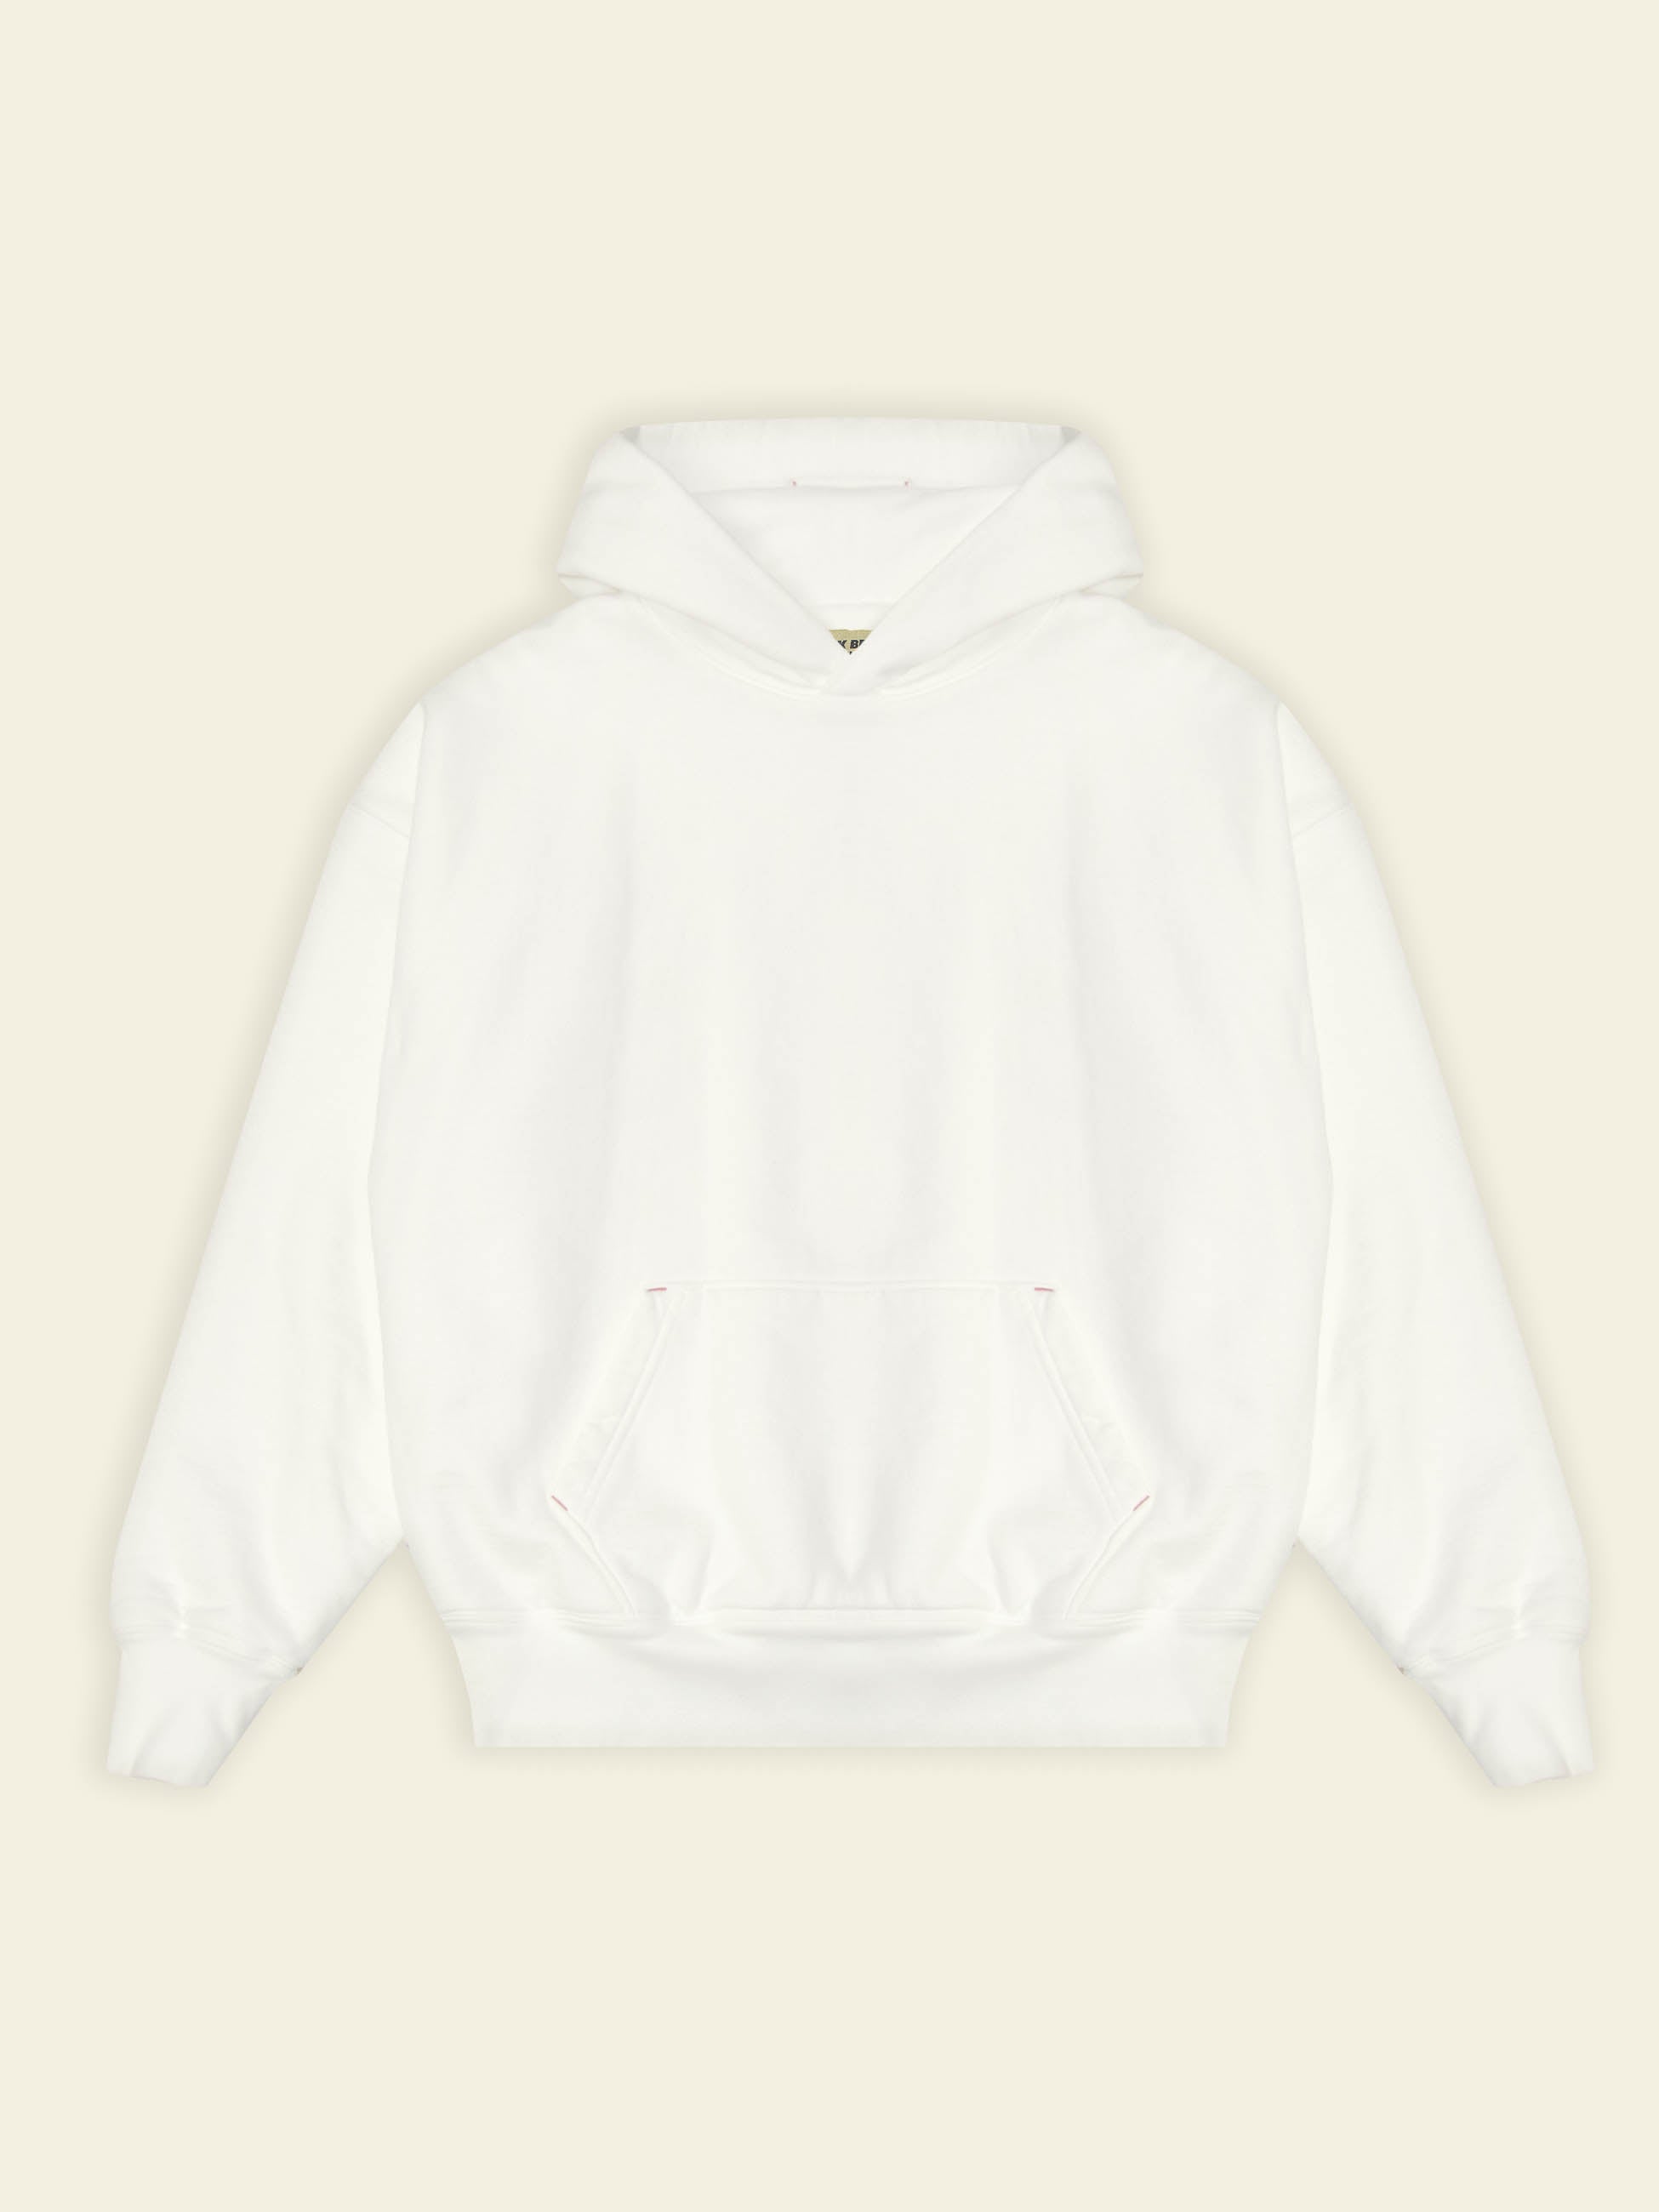 Publik Brand Double Layered Hoodie Acoustic White Front Side Heavyweight Fleece, all made in USA